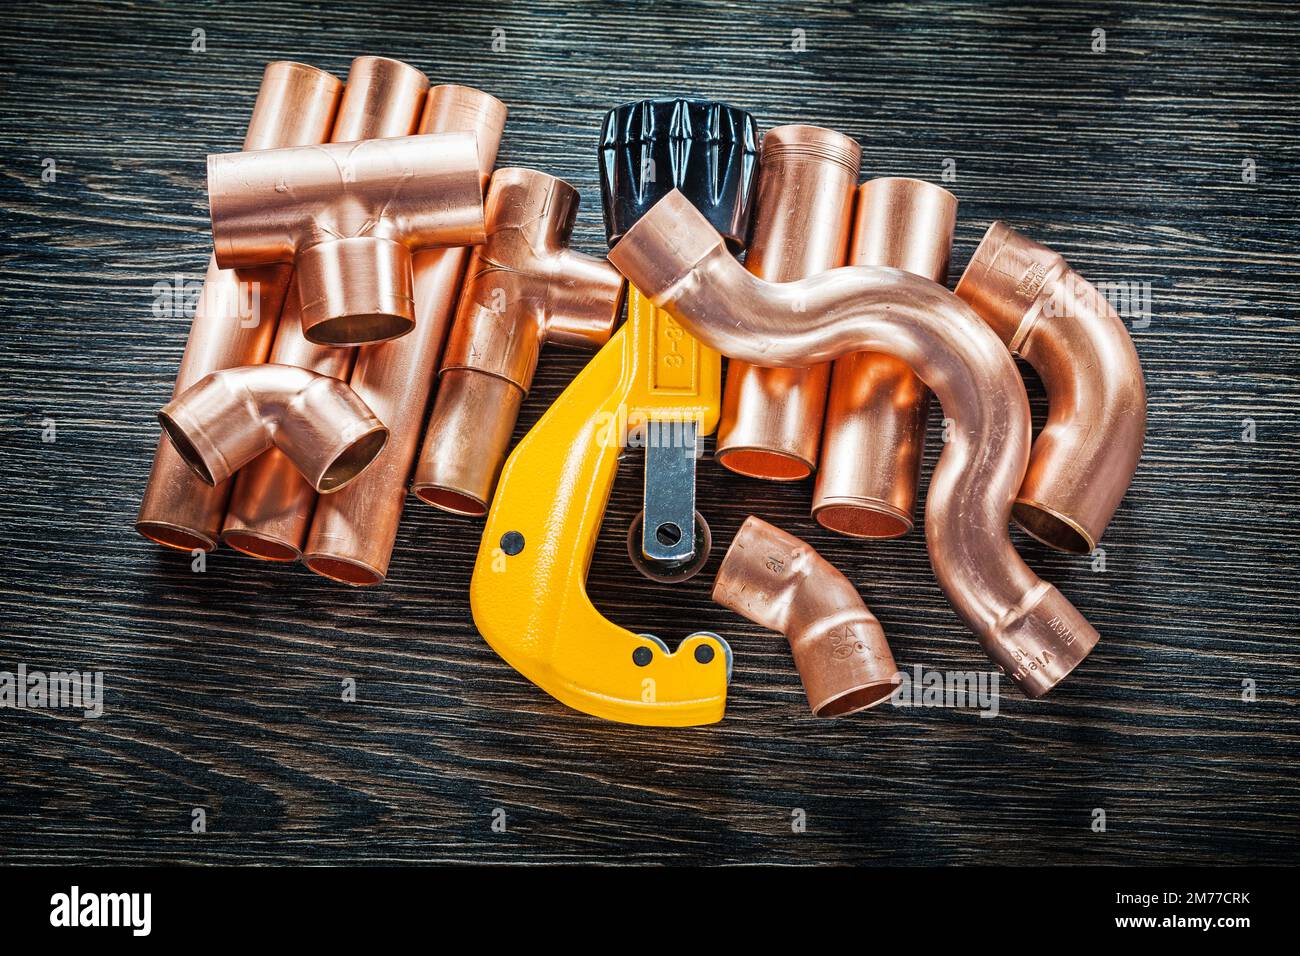 Plumbing copper water pipe cutter on wooden board. Stock Photo